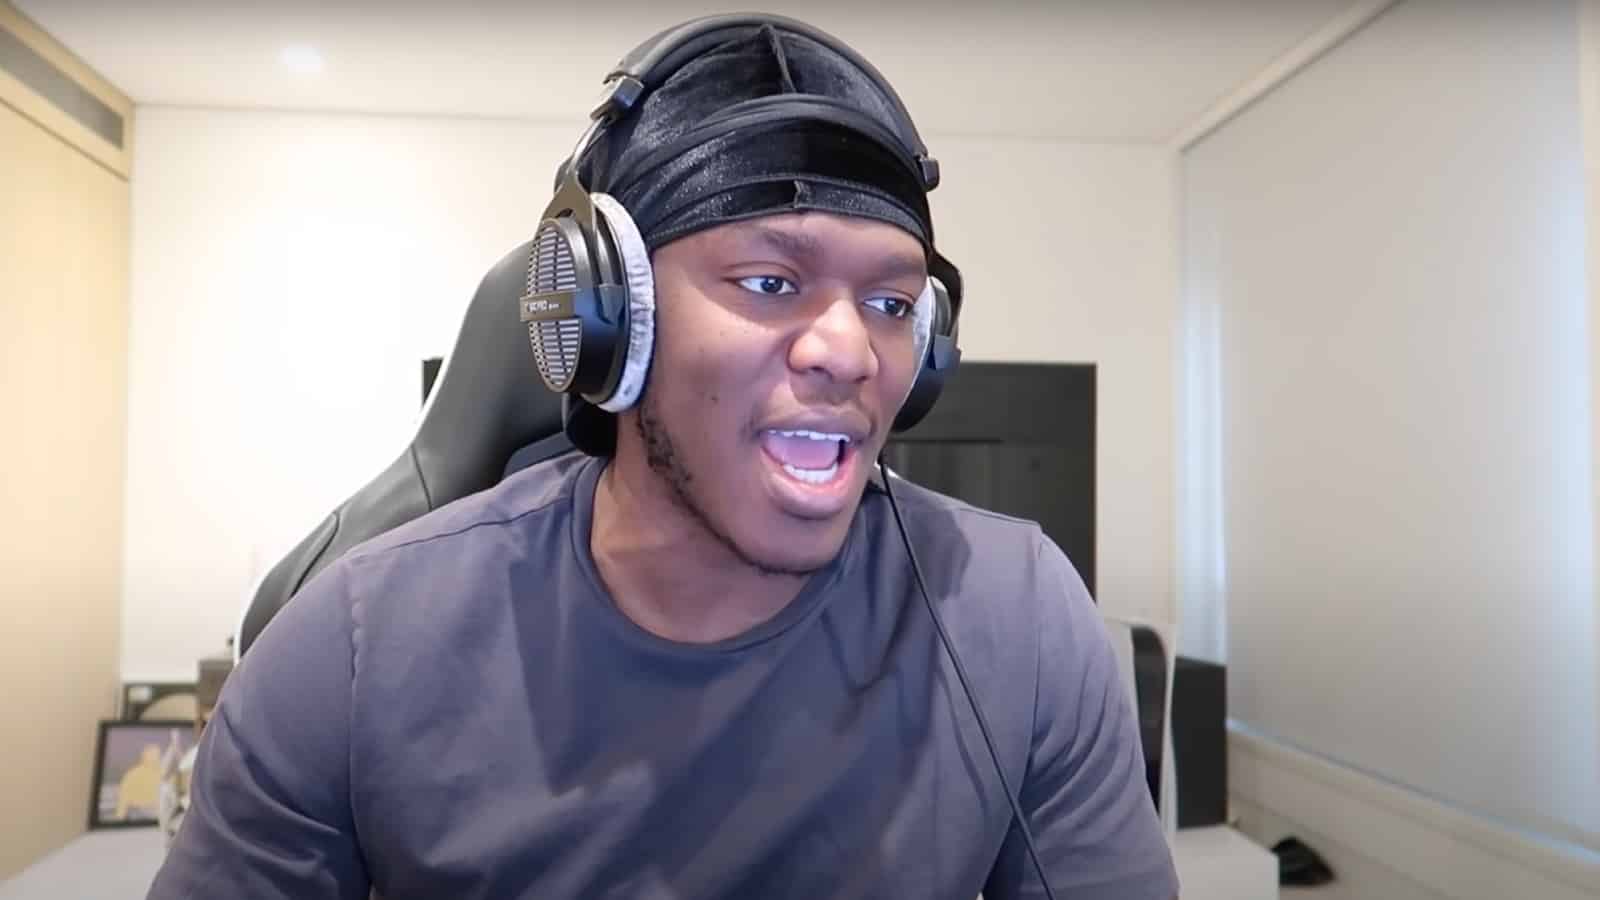 KSI responds to transphobia accusations